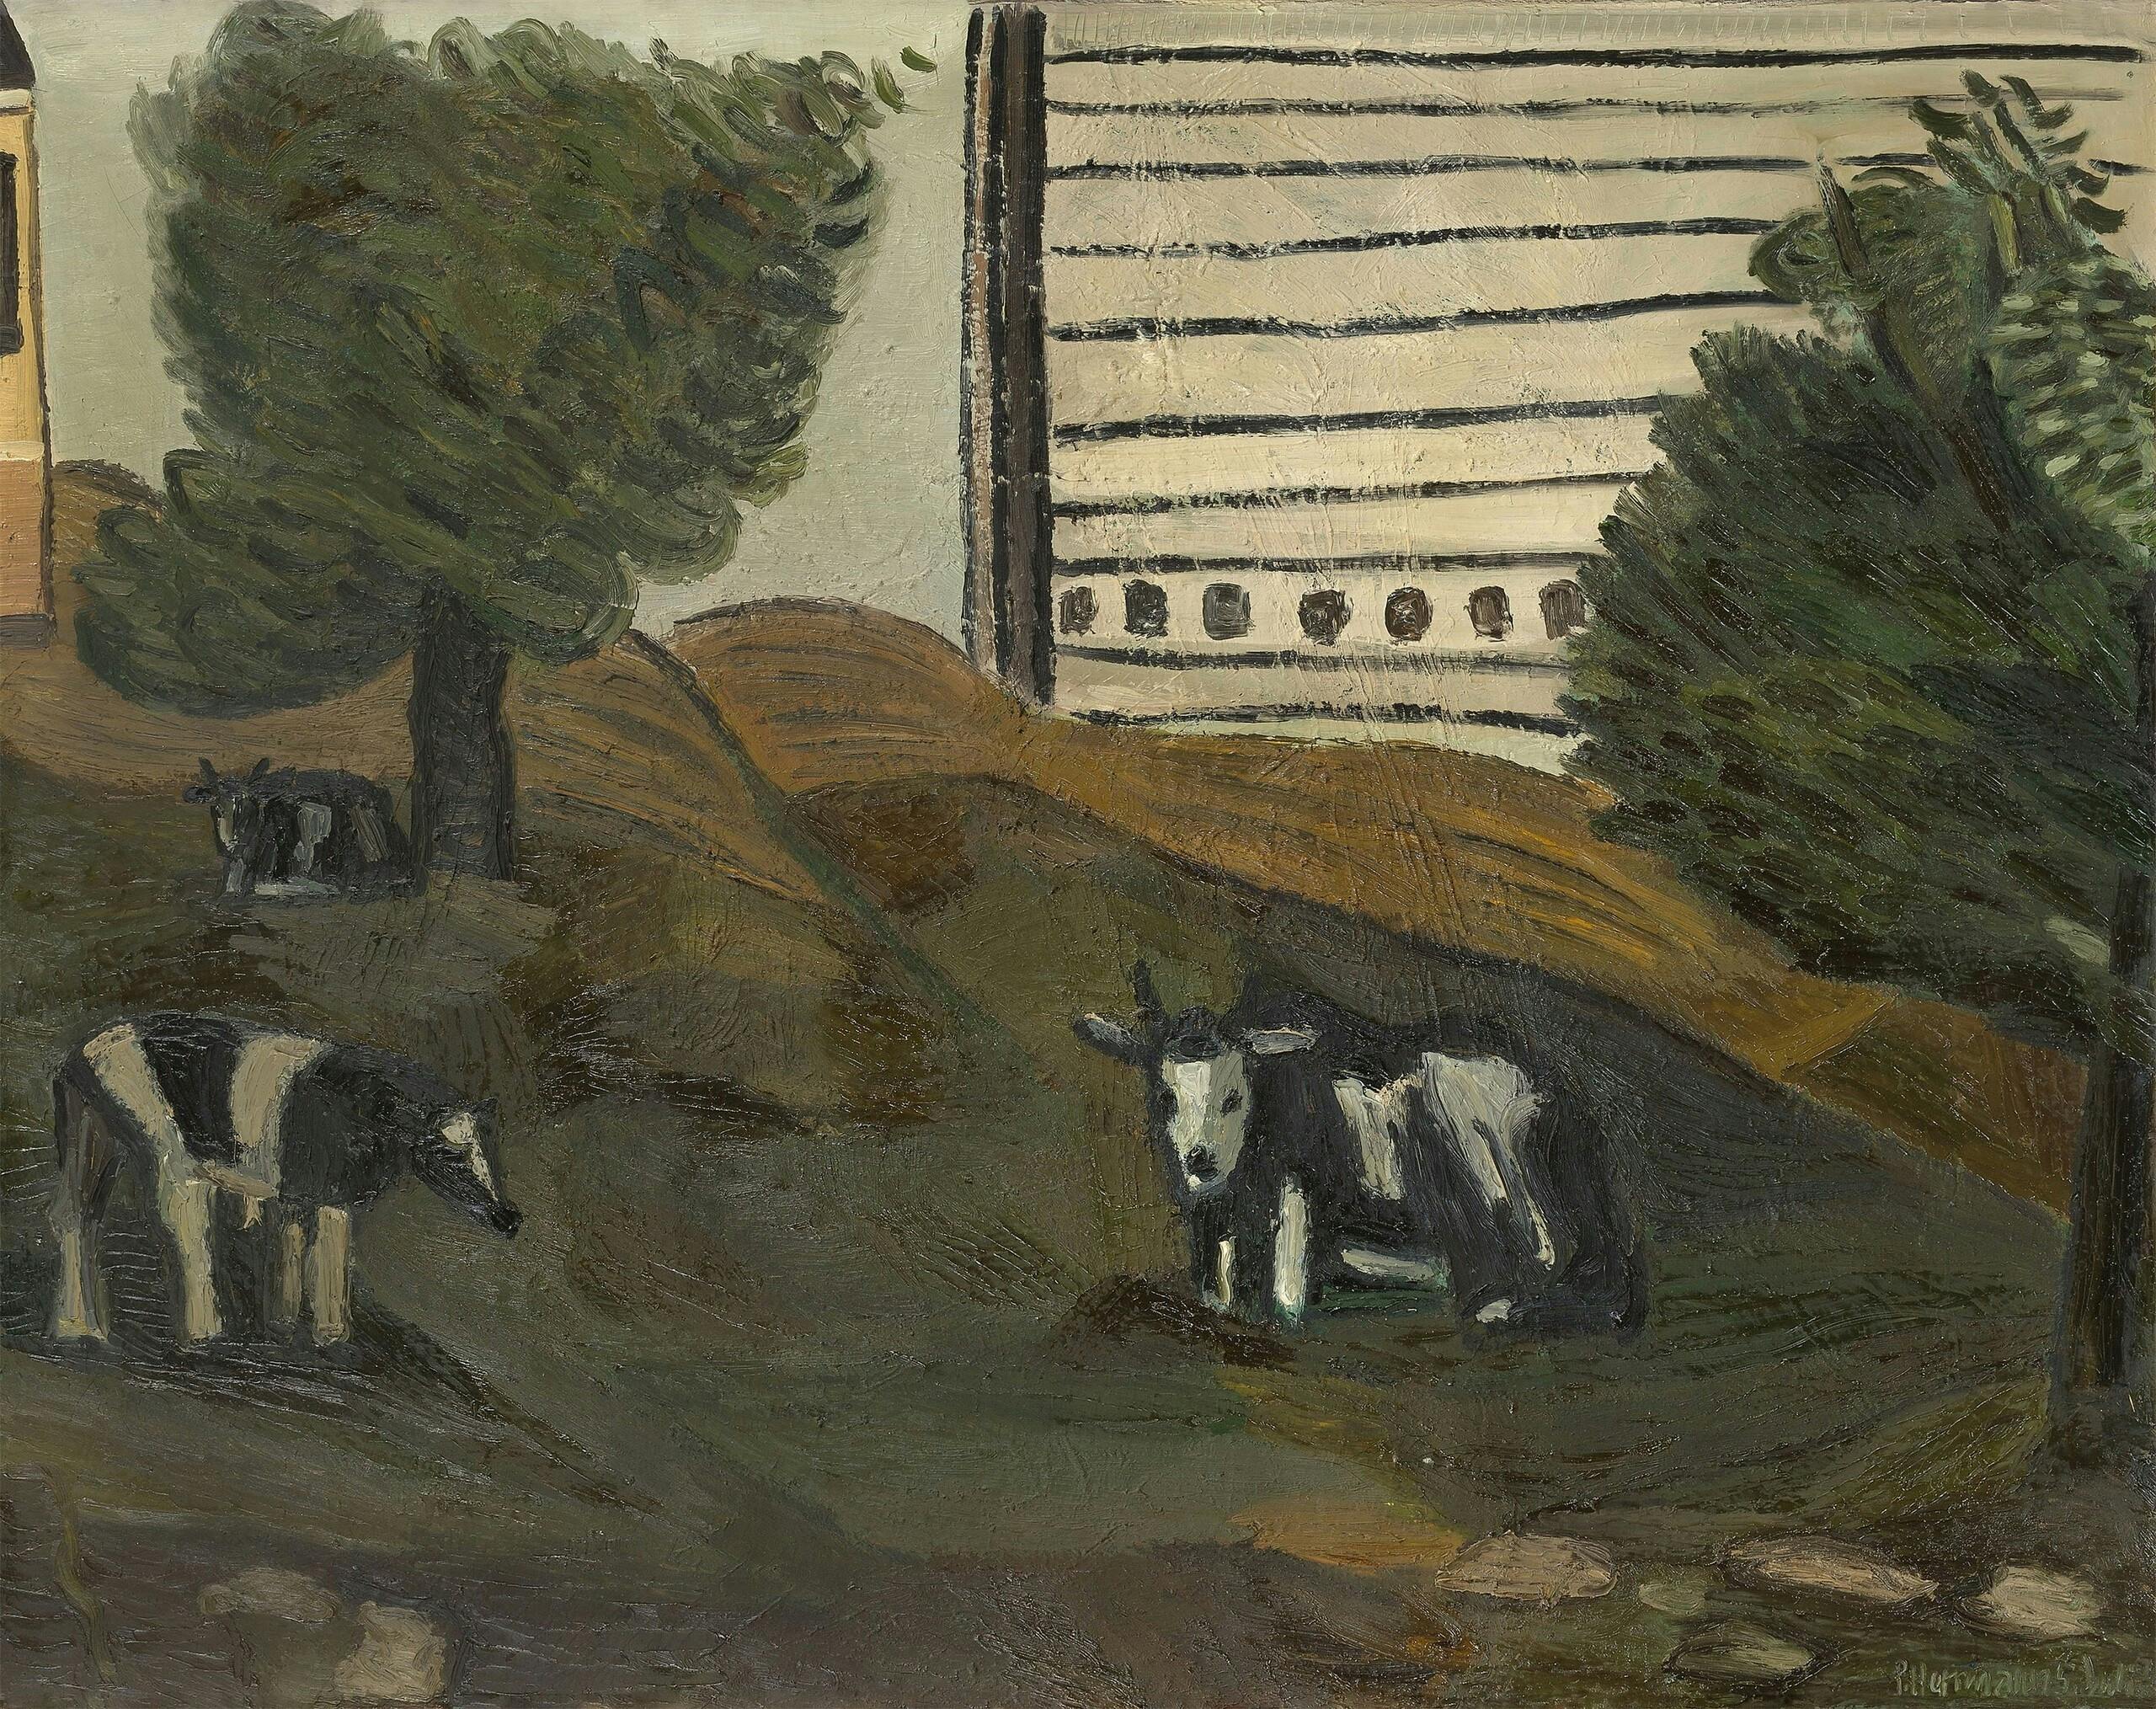 Painting: Three cows graze on a hilly meadow with trees. A huge skyscraper appears on the horizon, implied by simple brushstrokes.